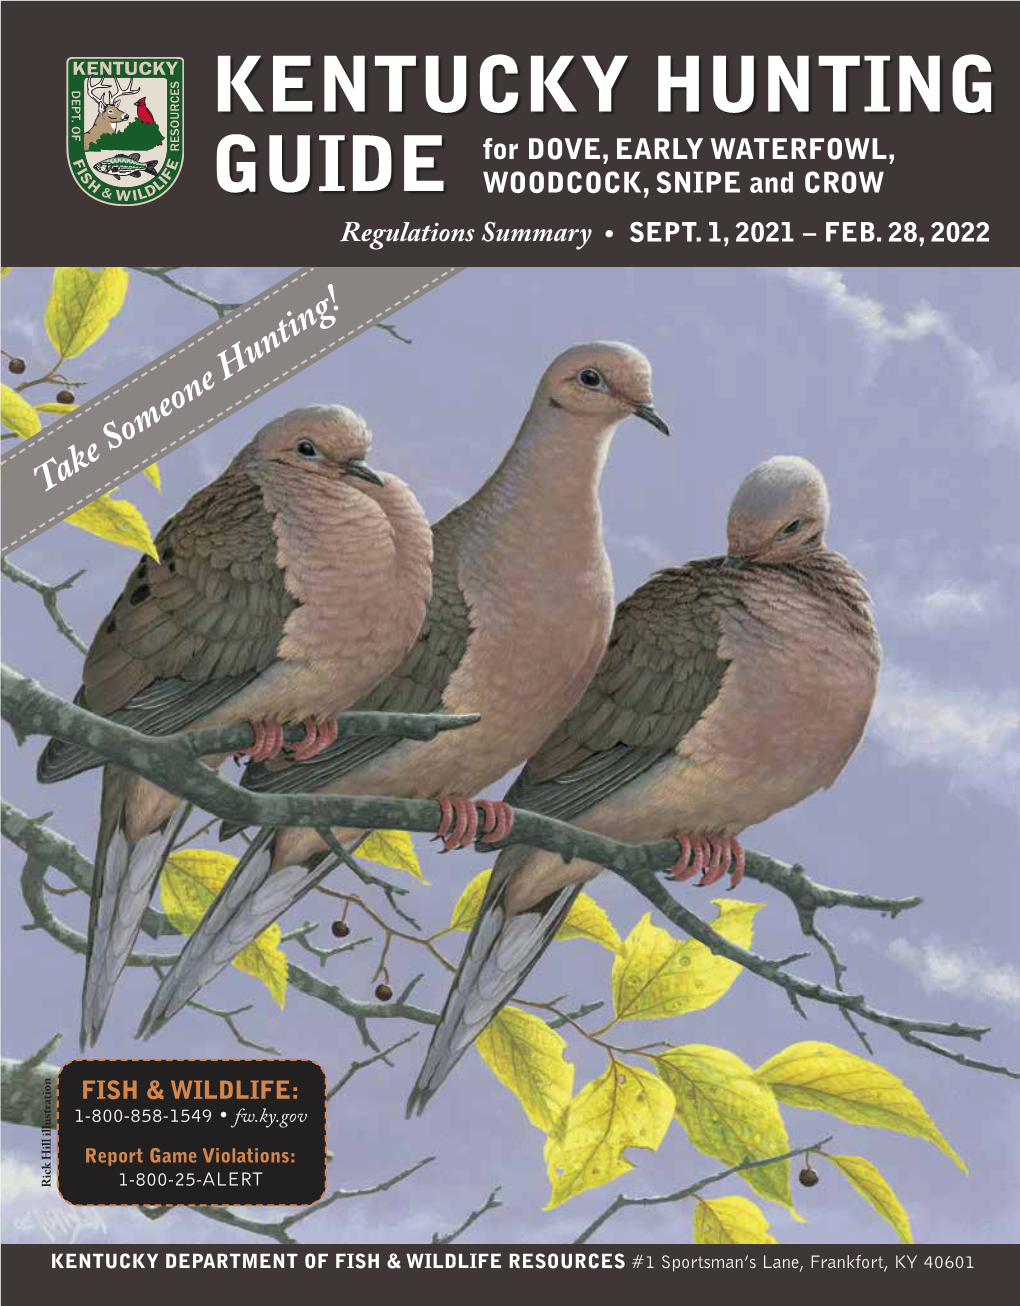 Kentucky Hunting Guide for Dove and Early